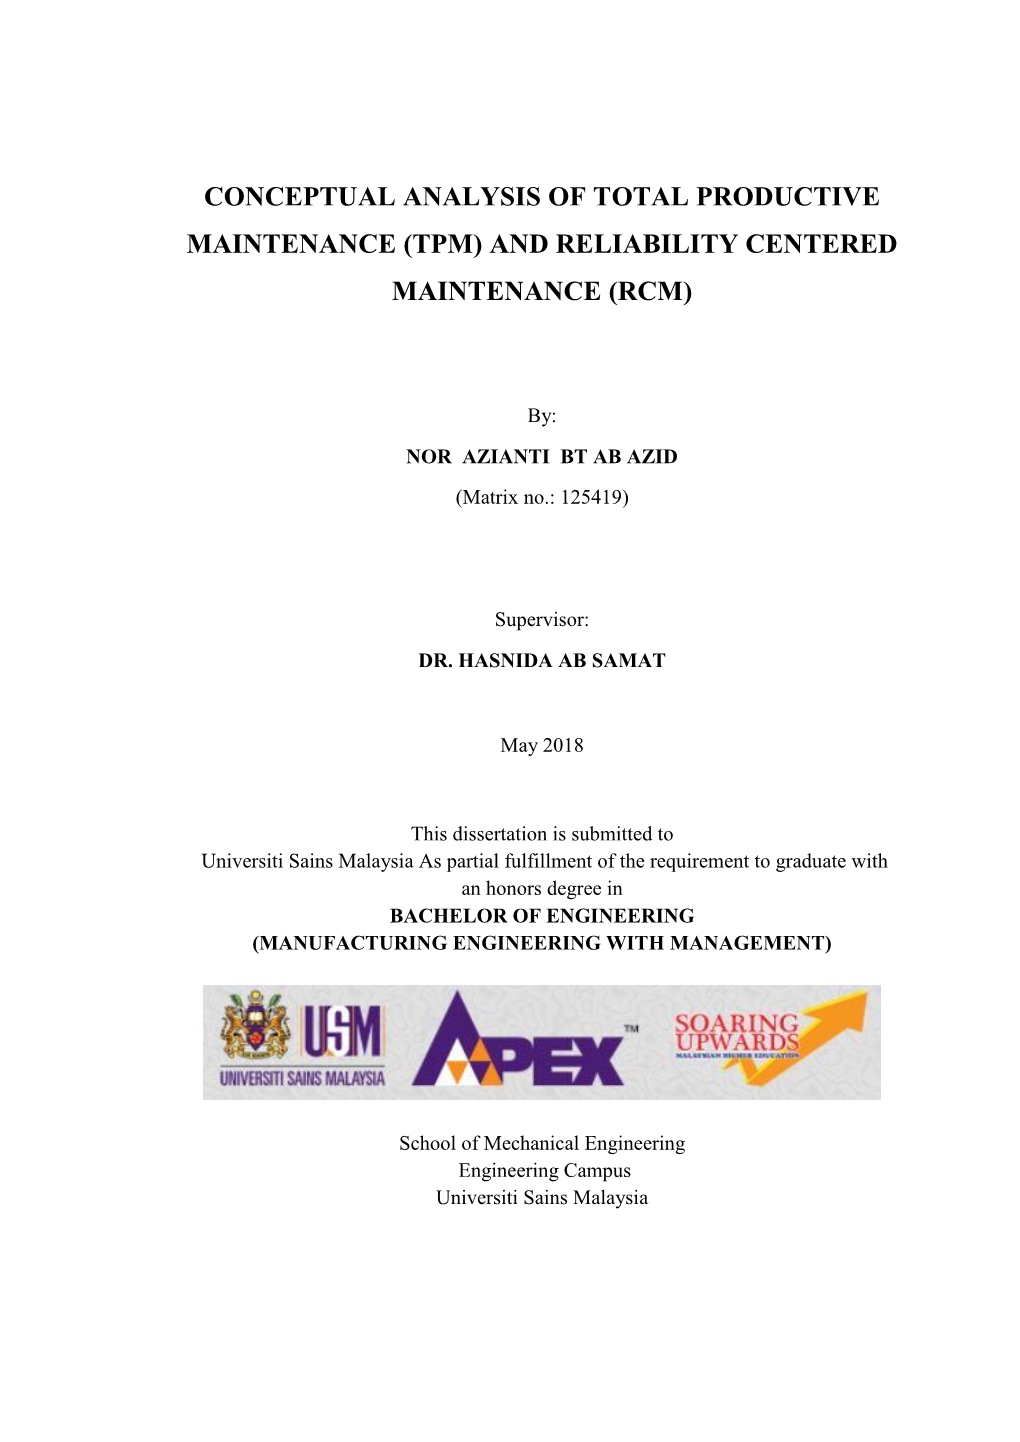 Tpm) and Reliability Centered Maintenance (Rcm